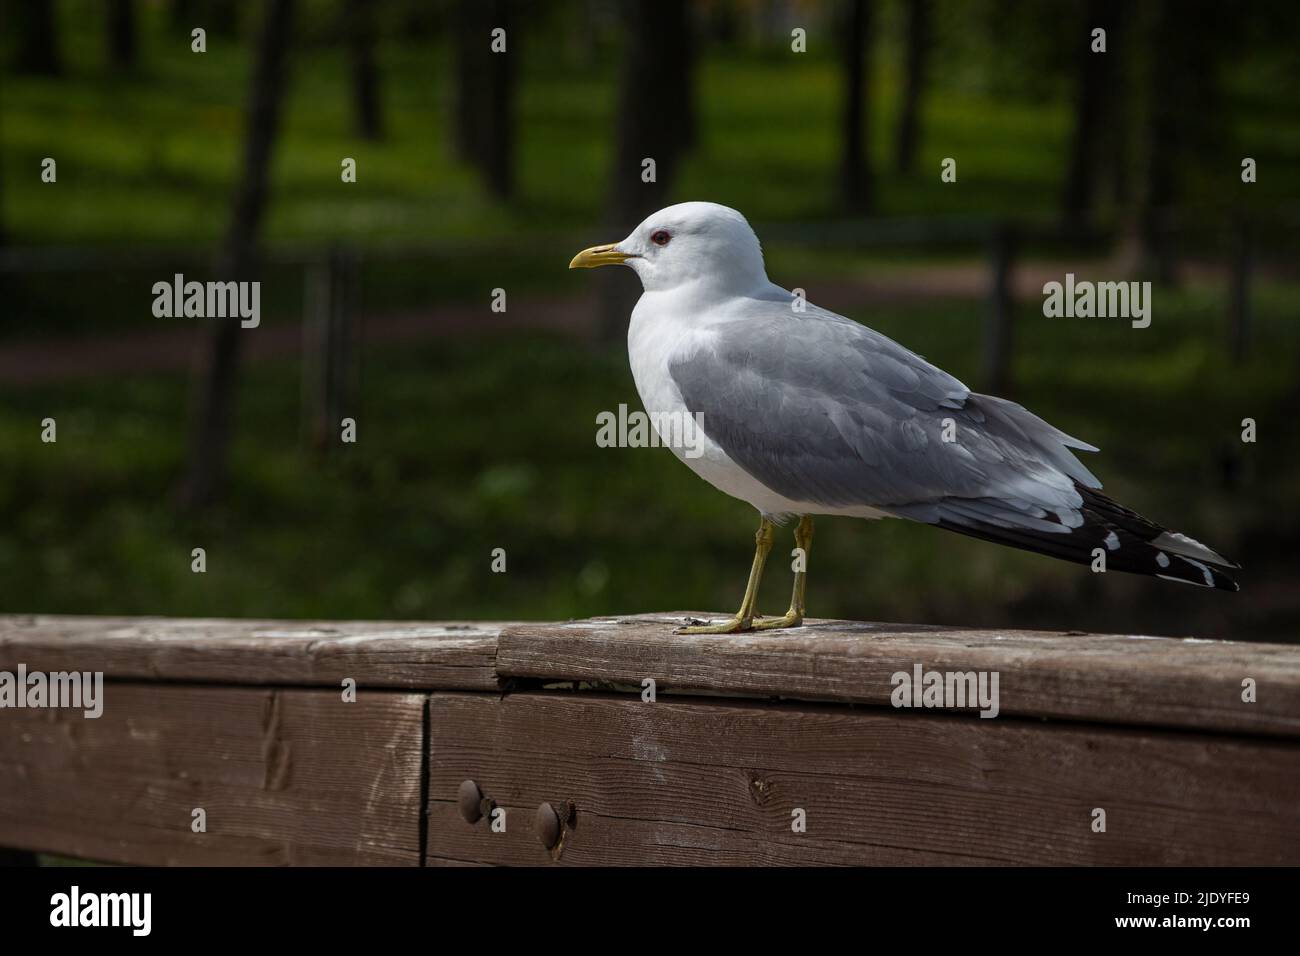 Close-up of a seagull perching on a wooden railing on a sunny day in the summer. Stock Photo